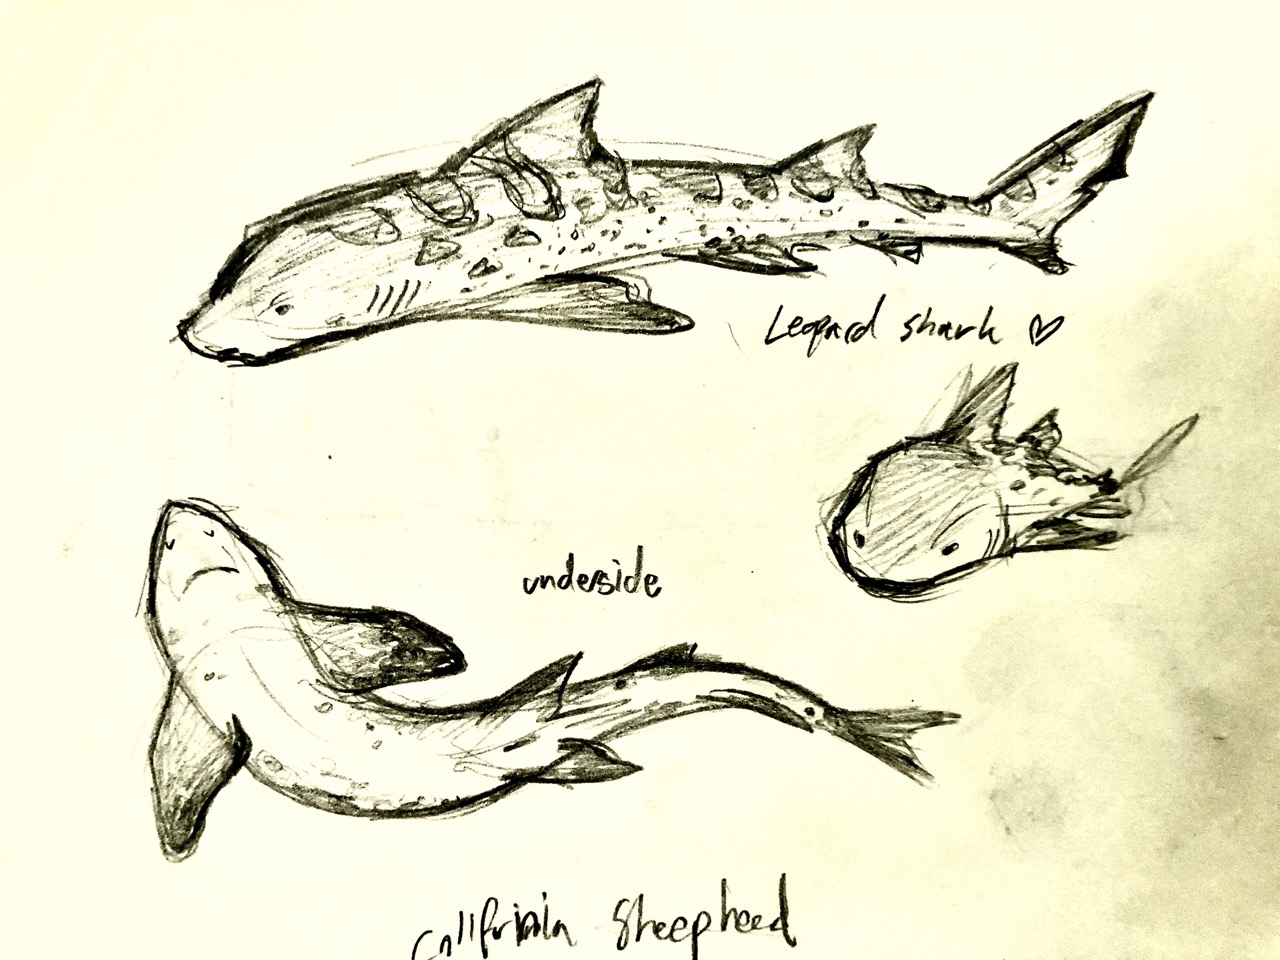 various sketches of a leopard shark-- front on, underside, and from the side.